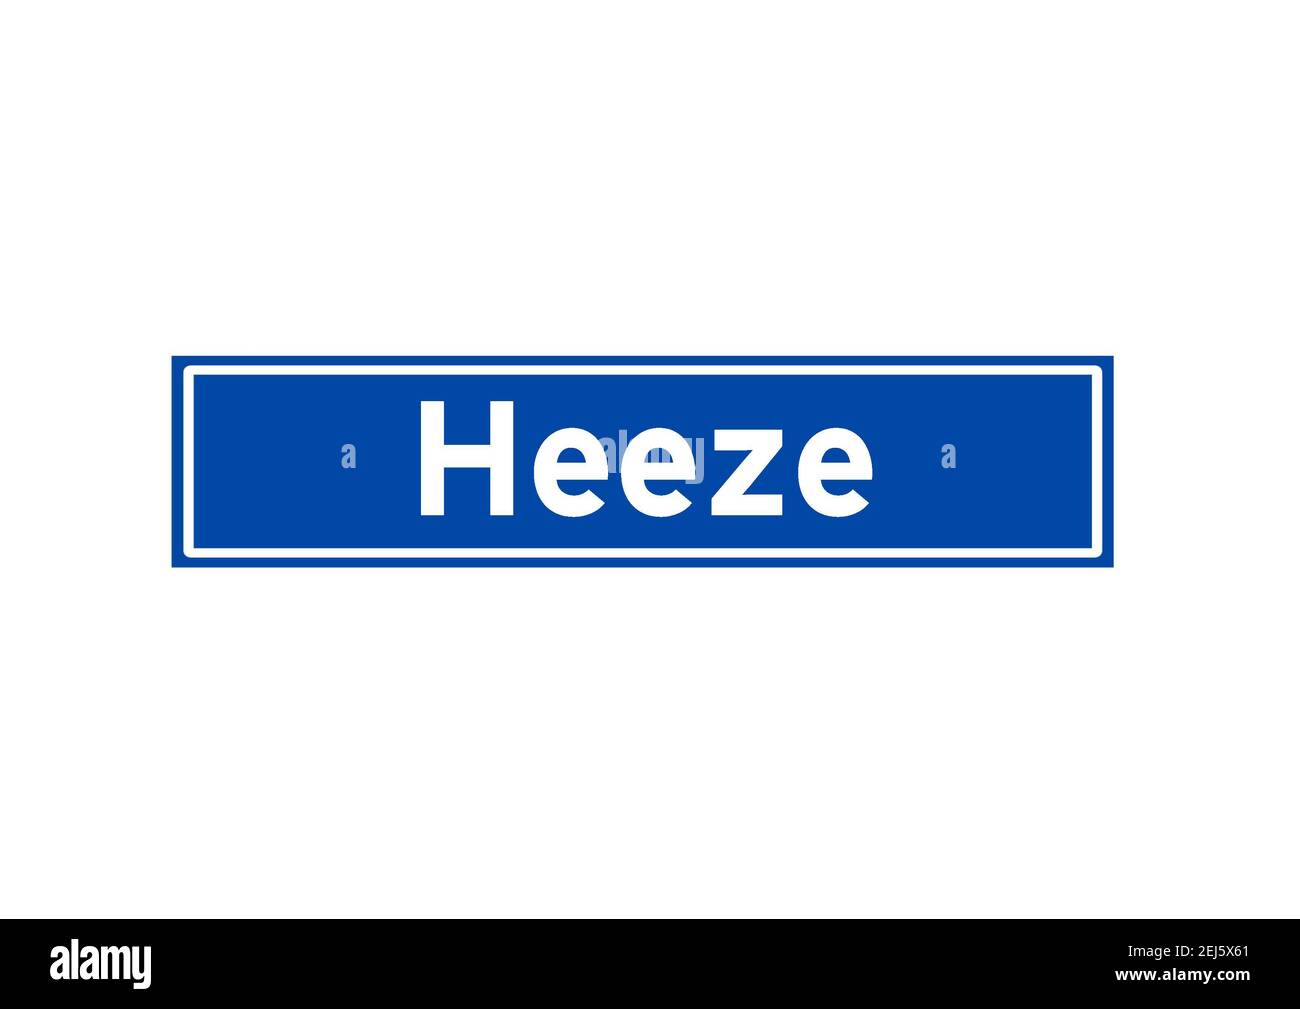 Heeze isolated Dutch place name sign. City sign from the Netherlands. Stock Photo